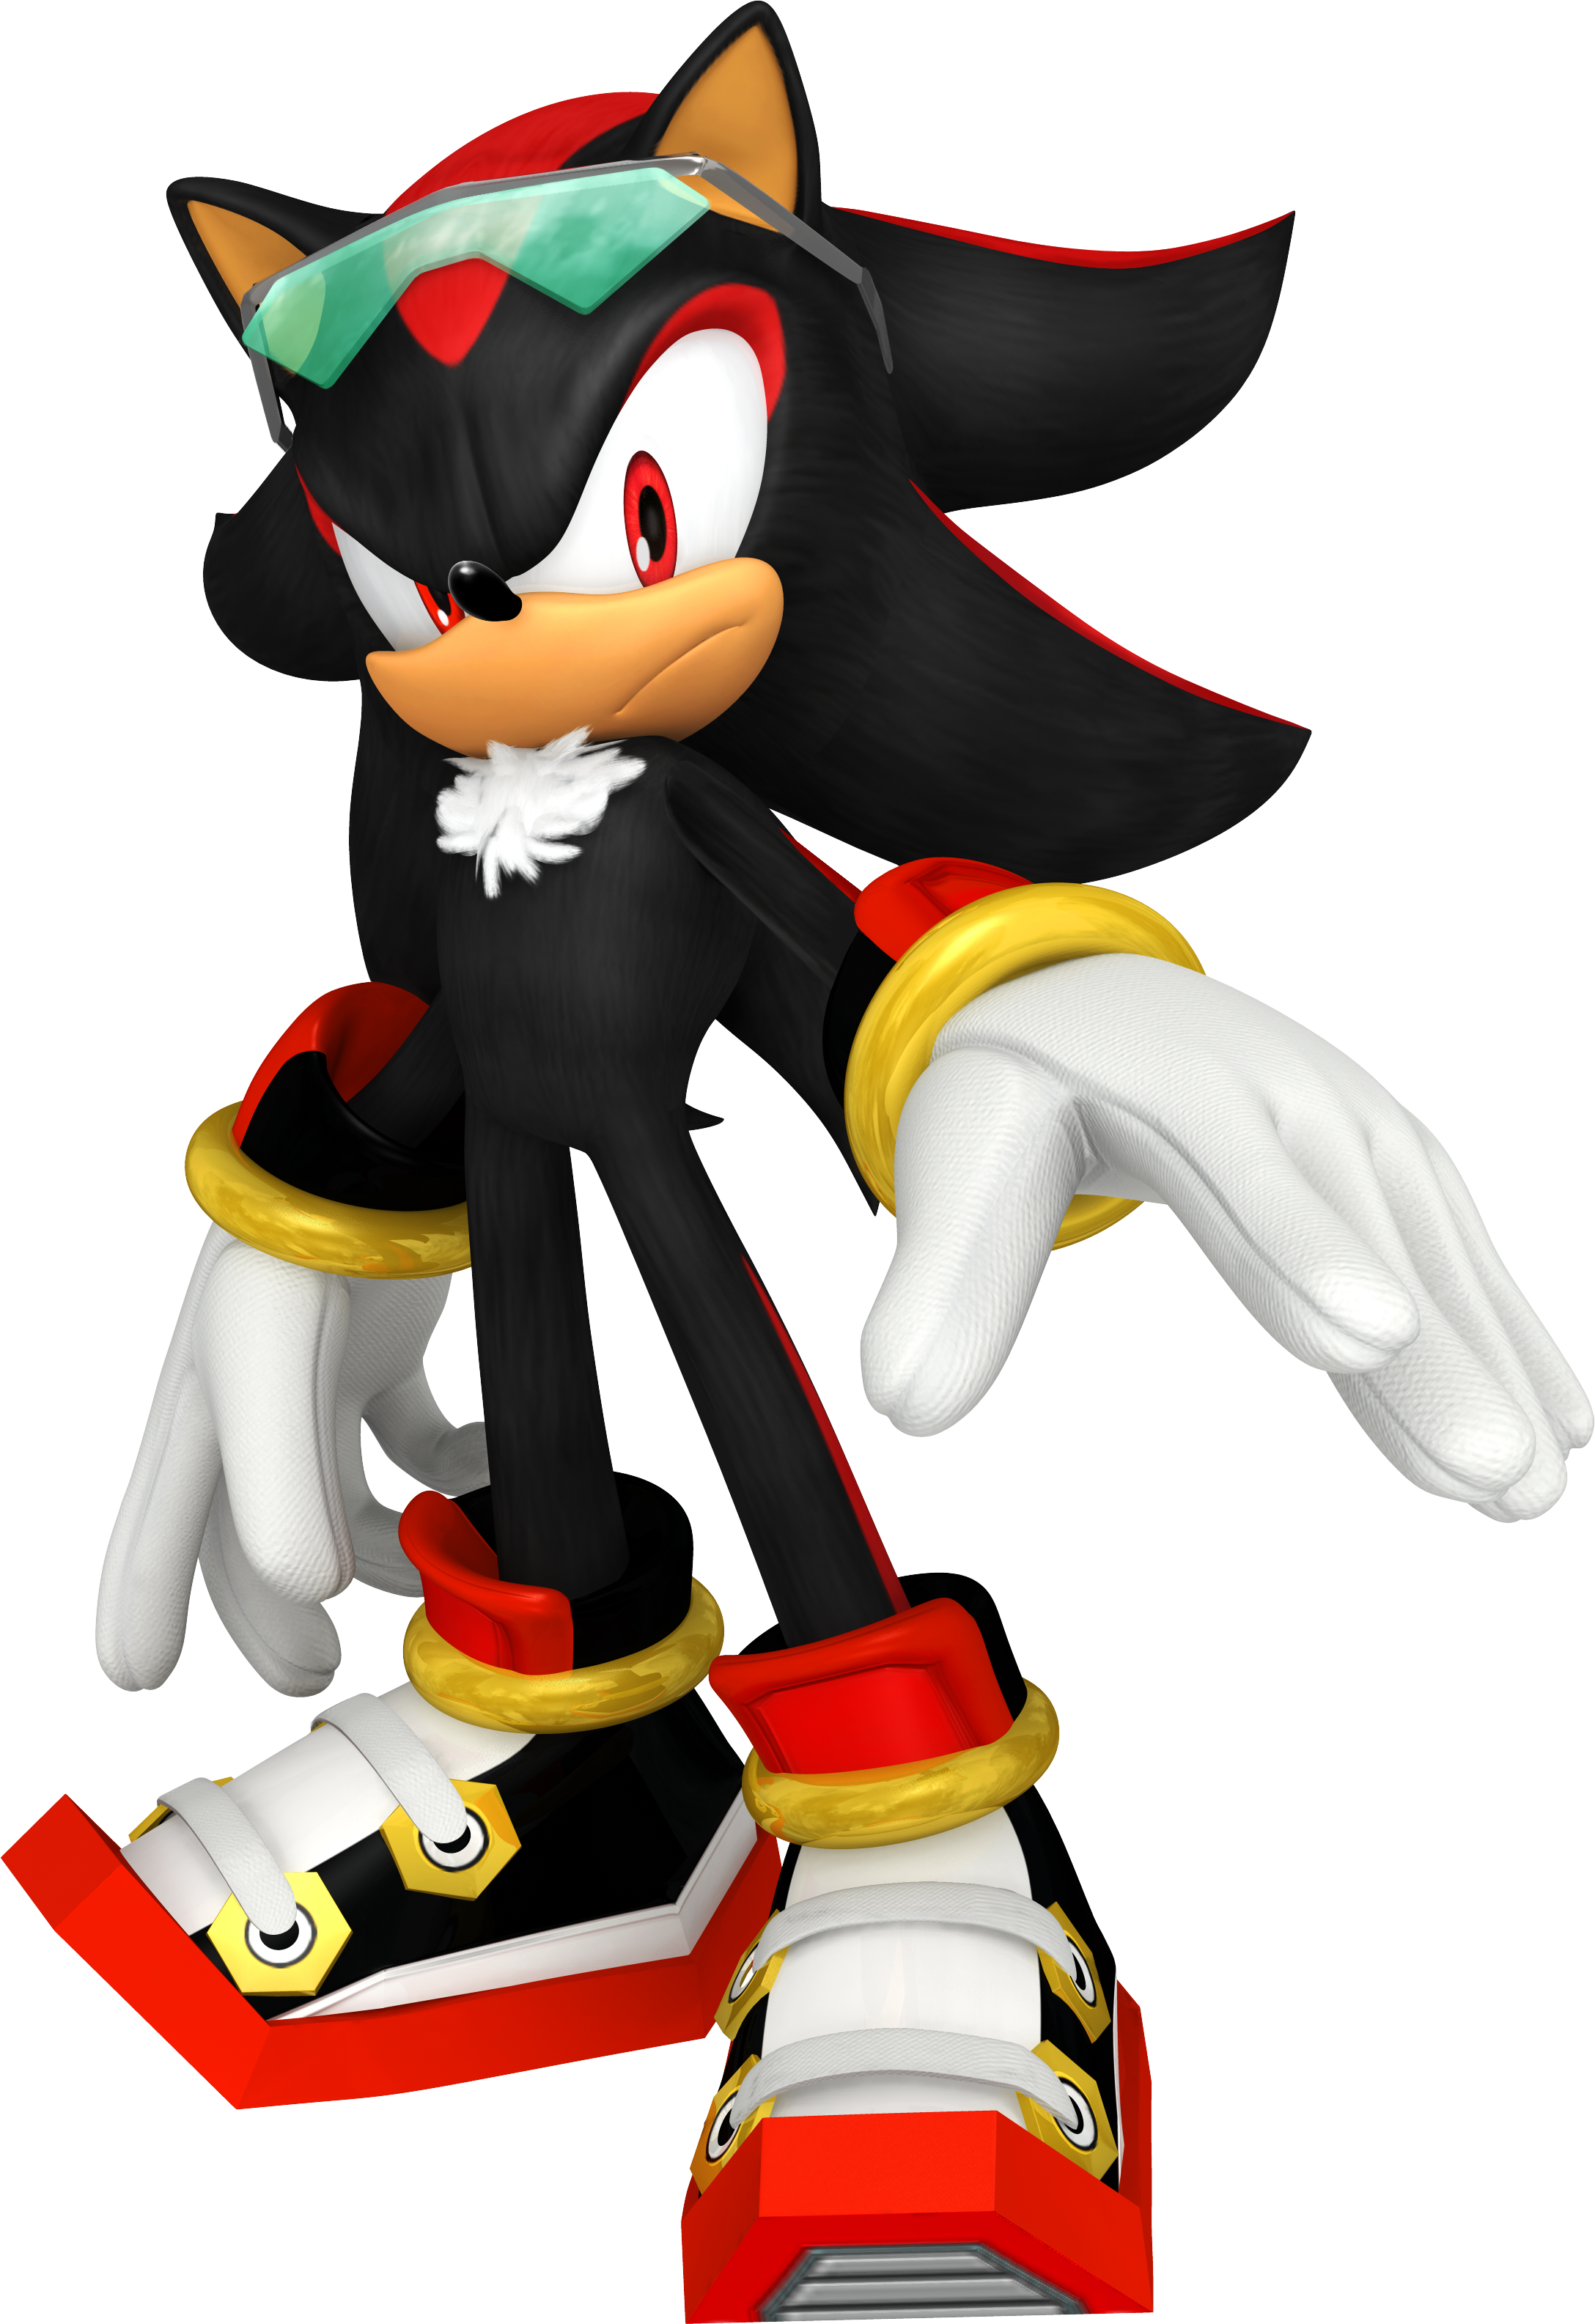 free download sonic the hedgehog sonic free riders